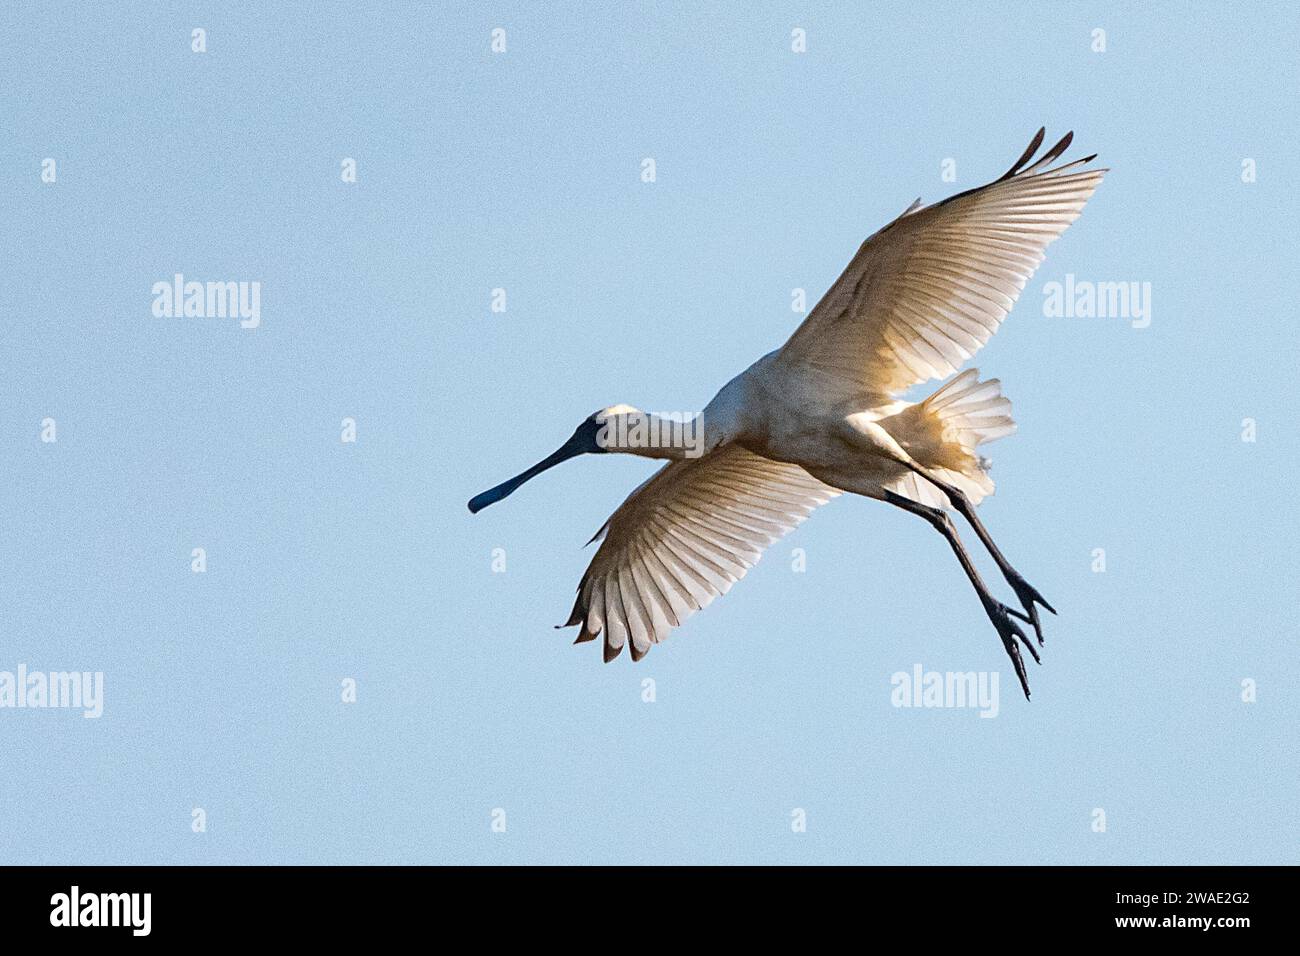 Royal Spoonbill (Platalea regia) in flight with wings outstretched, Northern Territory, Australia Stock Photo